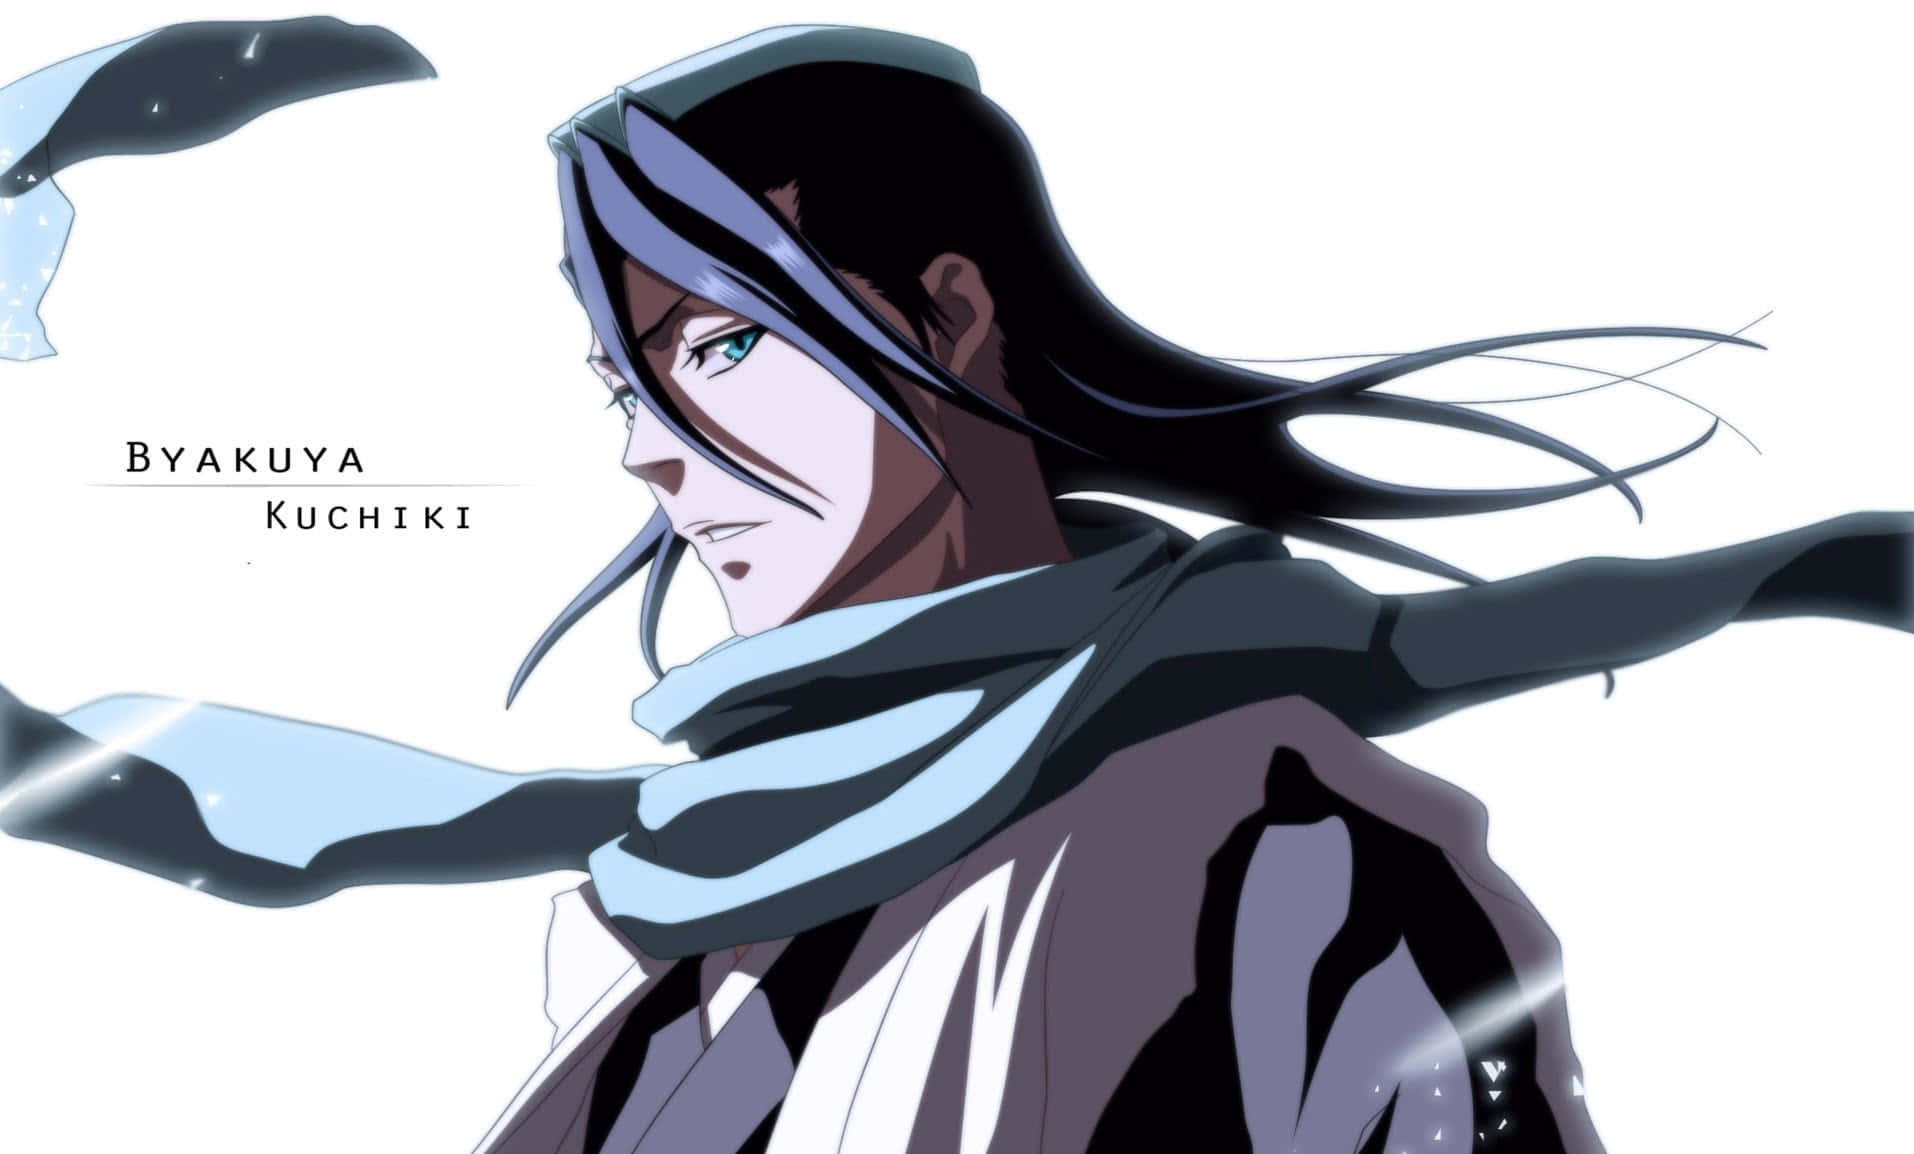 Byakuya Kuchiki, captain of the 6th Division in the Gotei 13 of Bleach Wallpaper